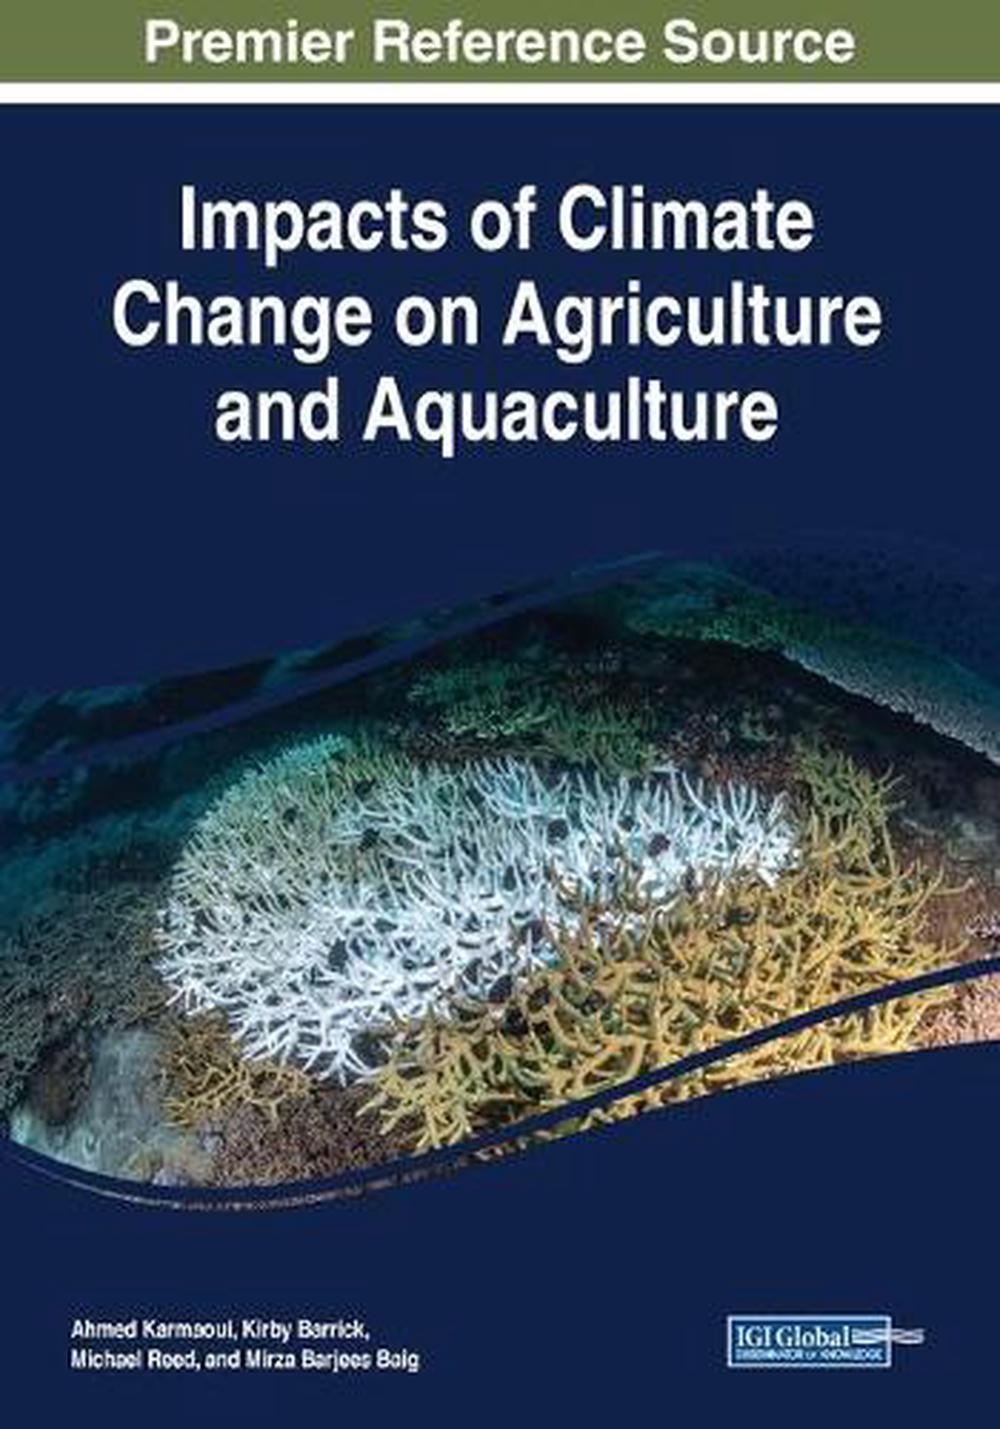 literature review on climate change and agriculture